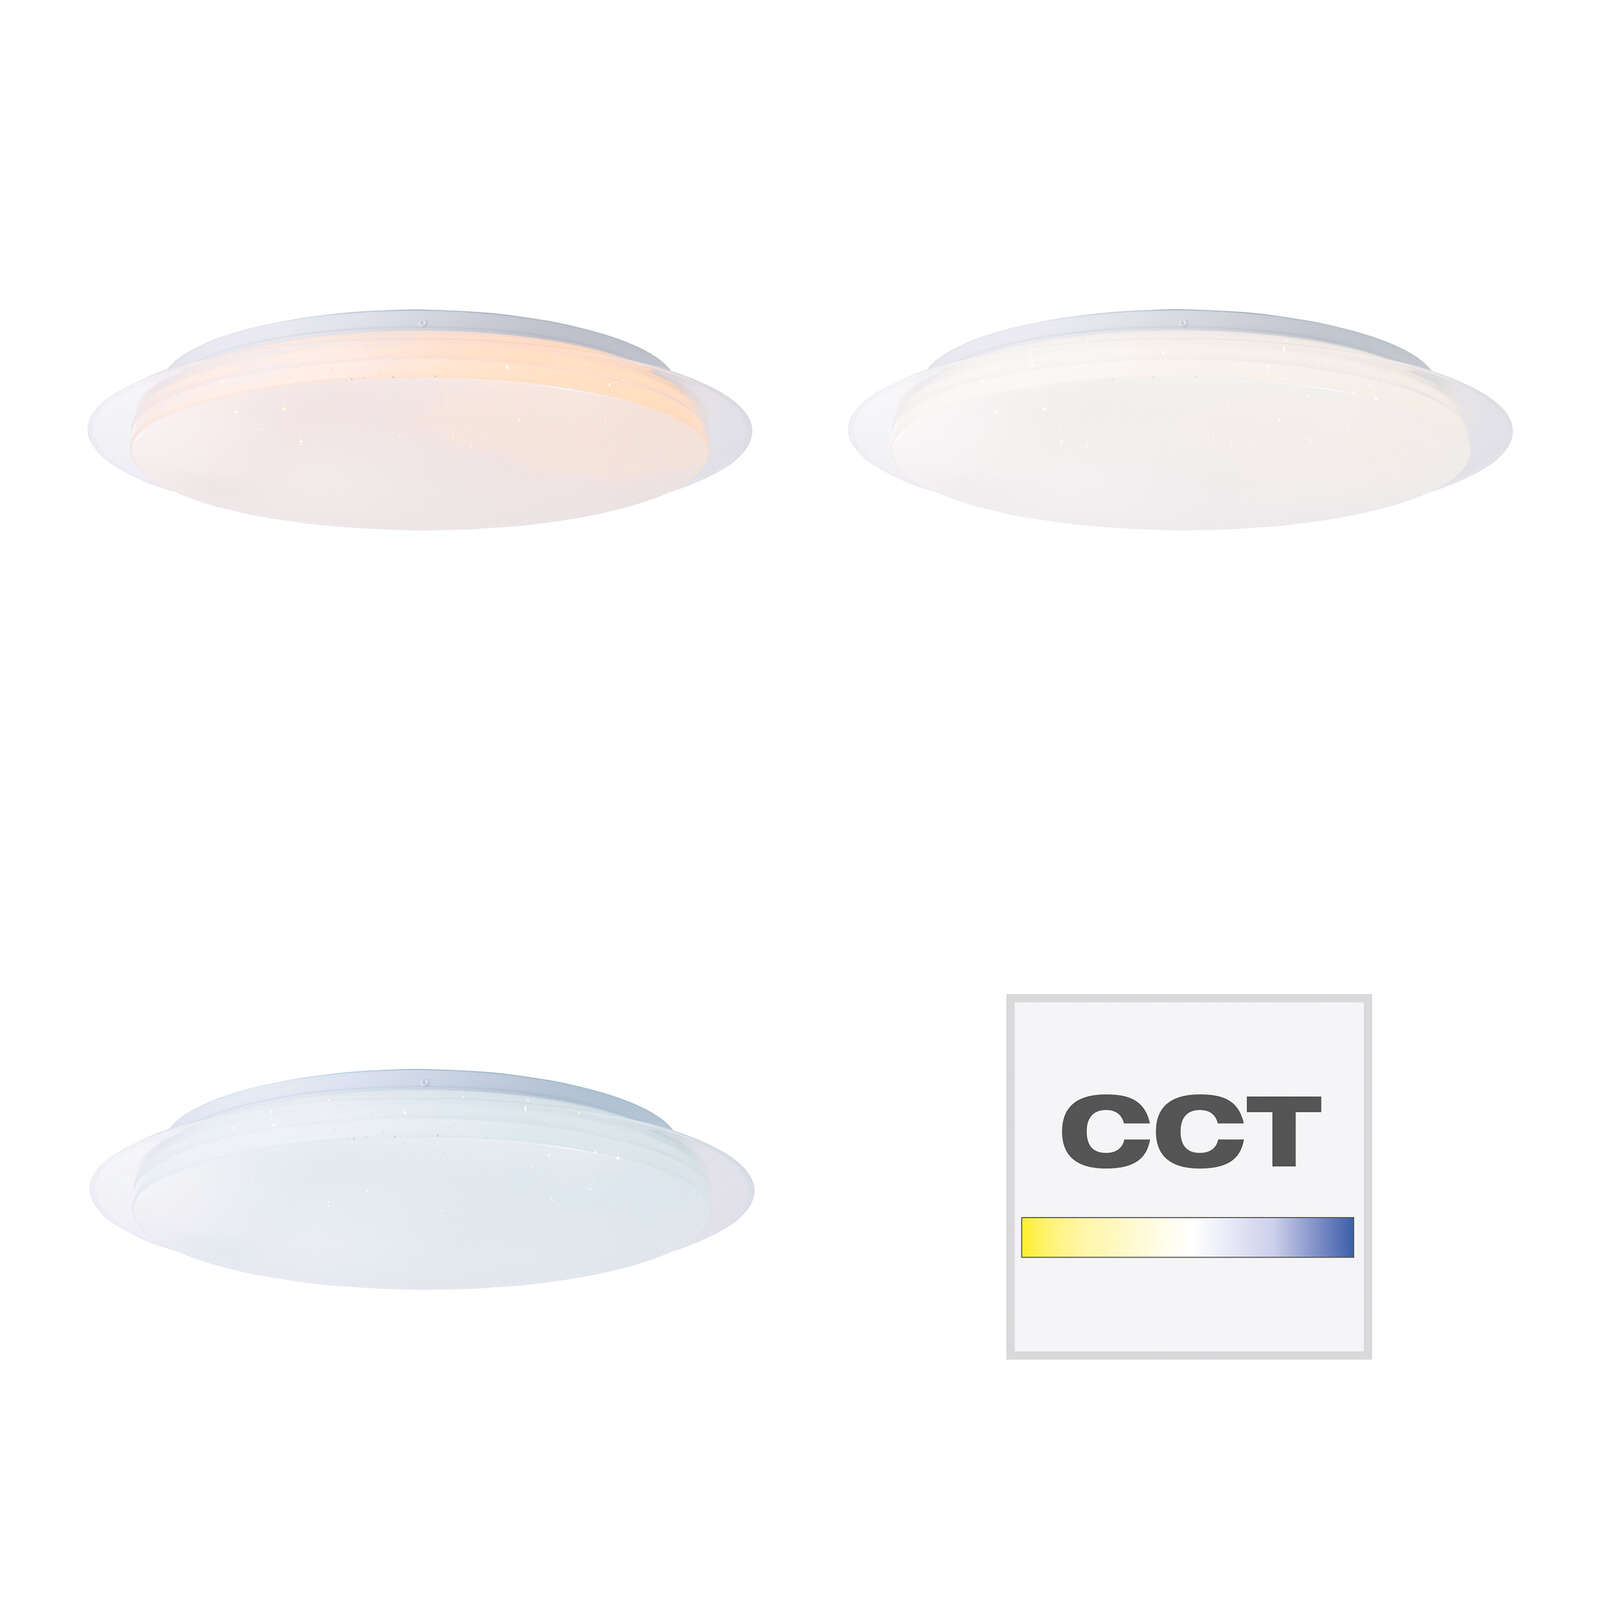             Plastic wall and ceiling light - Theo 3 - White
        